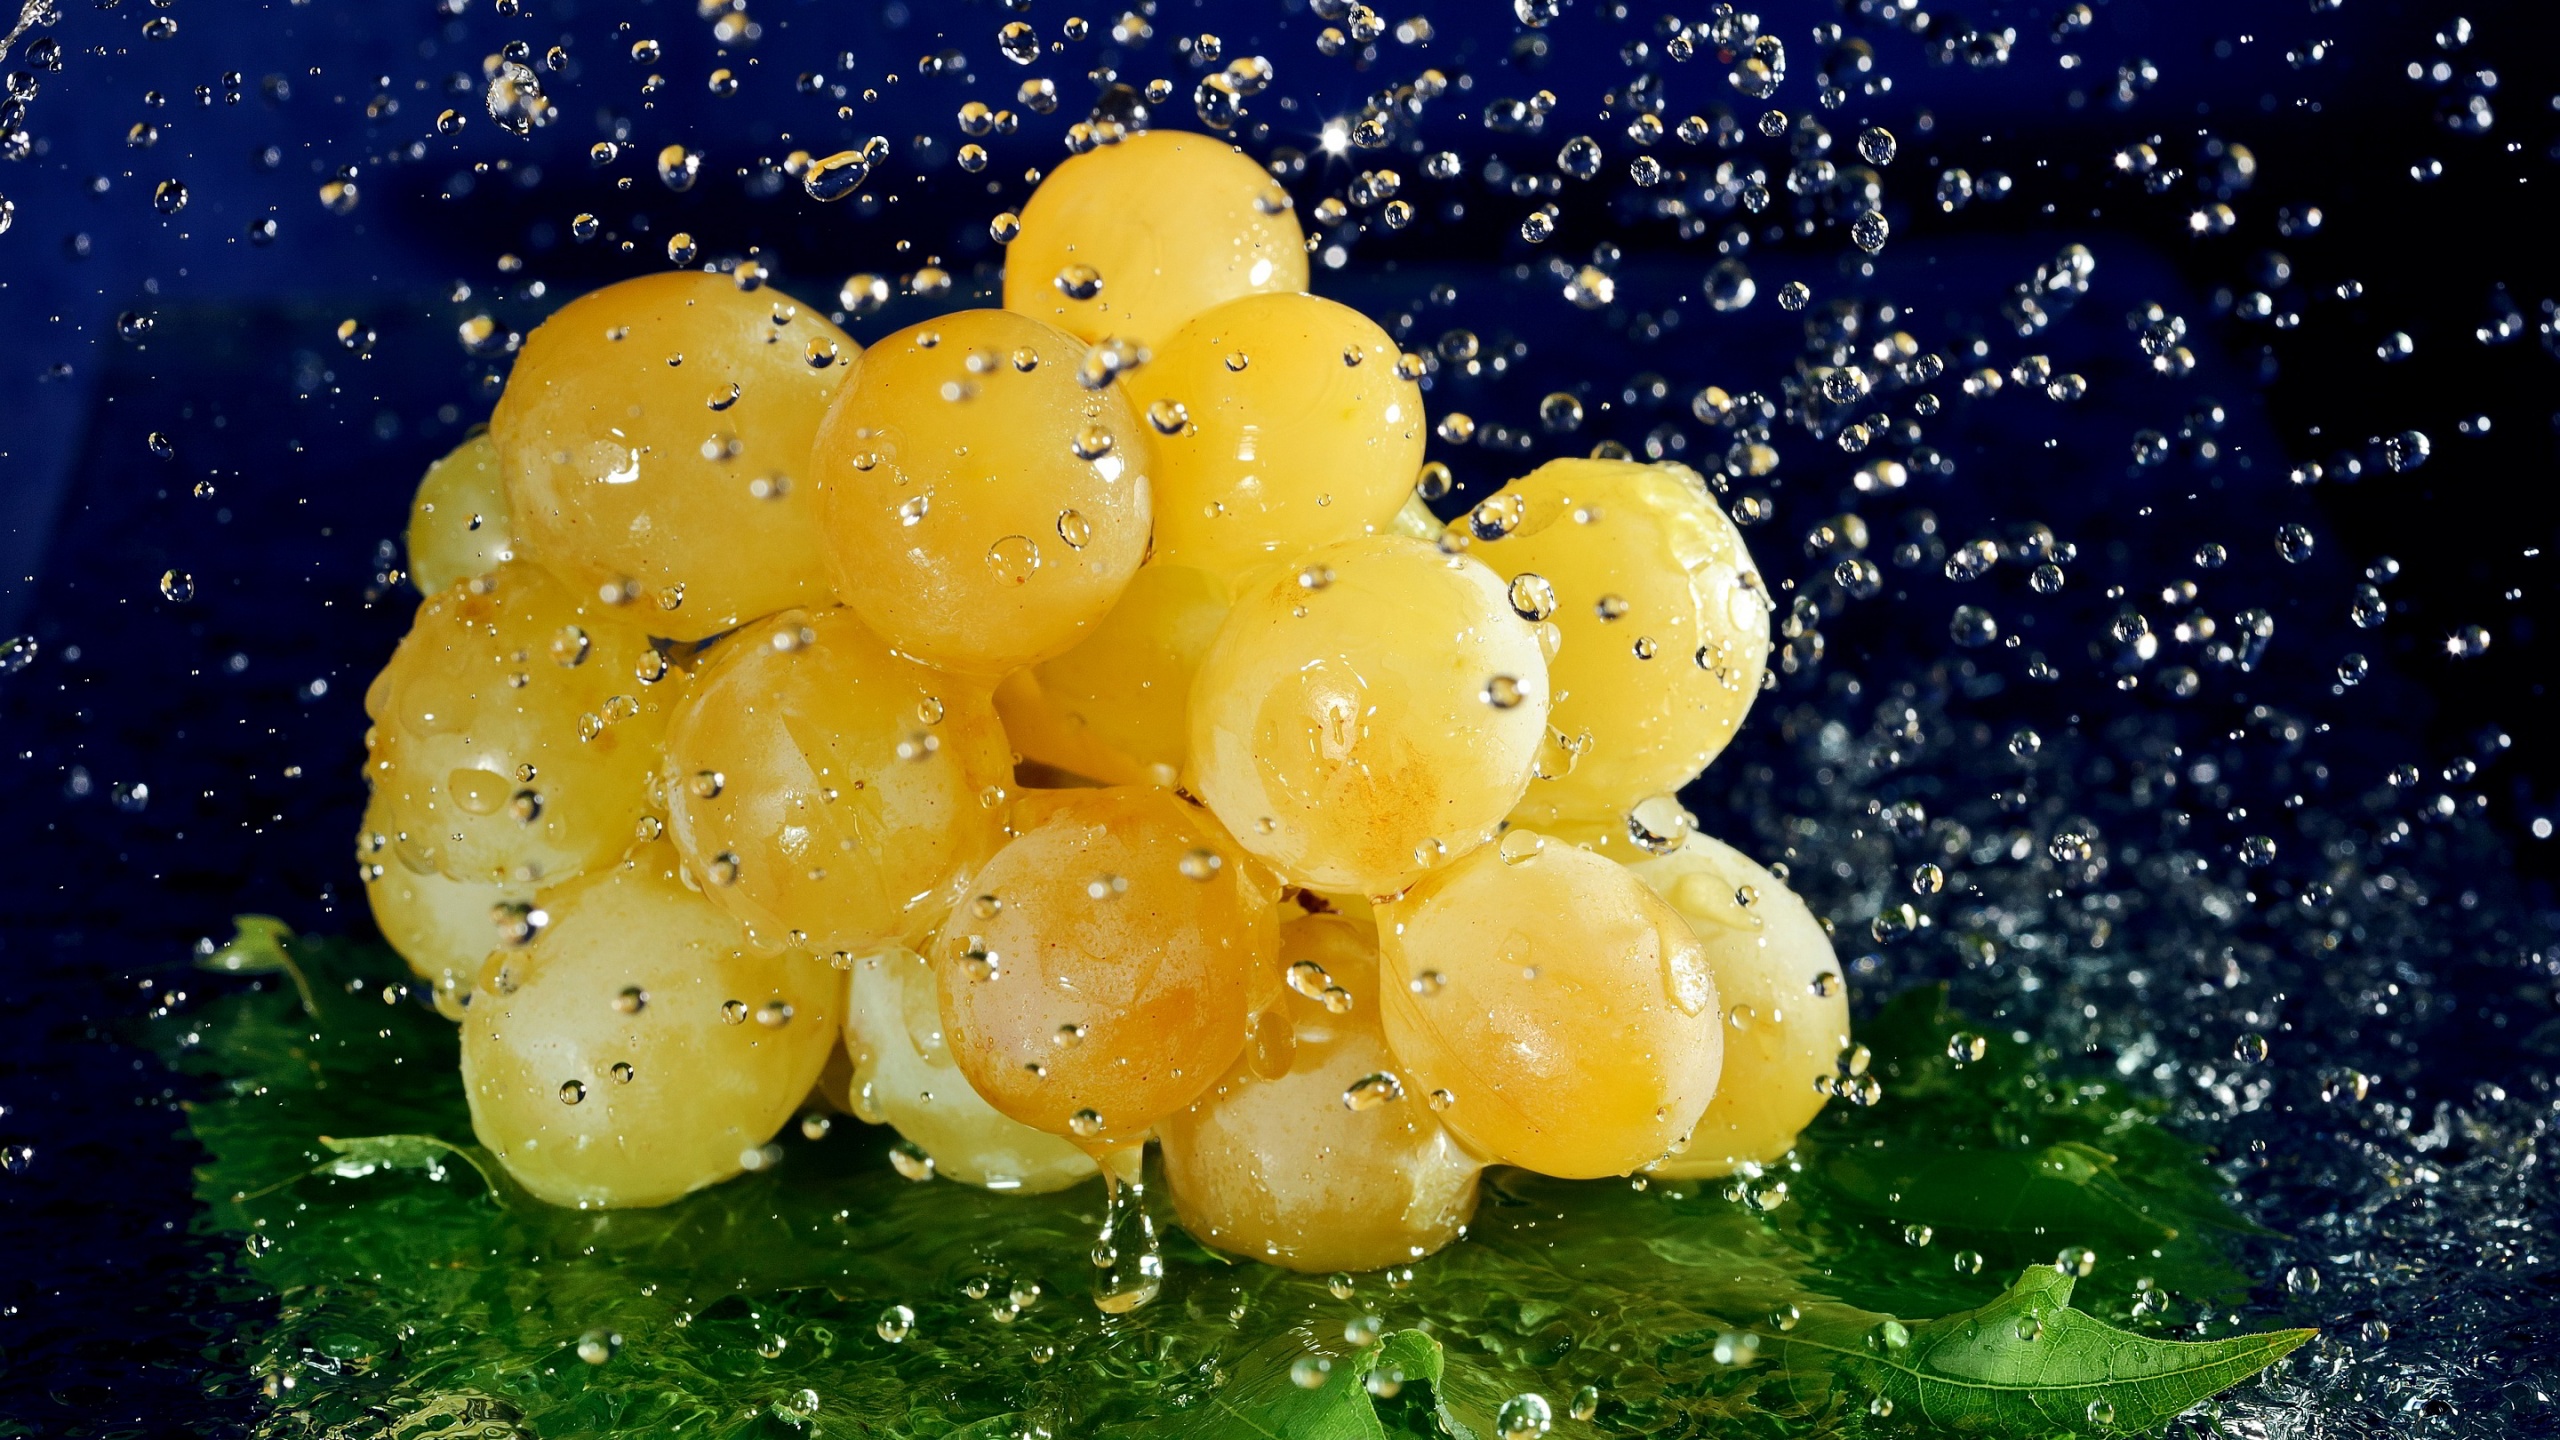 Grapes With Water Drops Hd - HD Wallpaper 